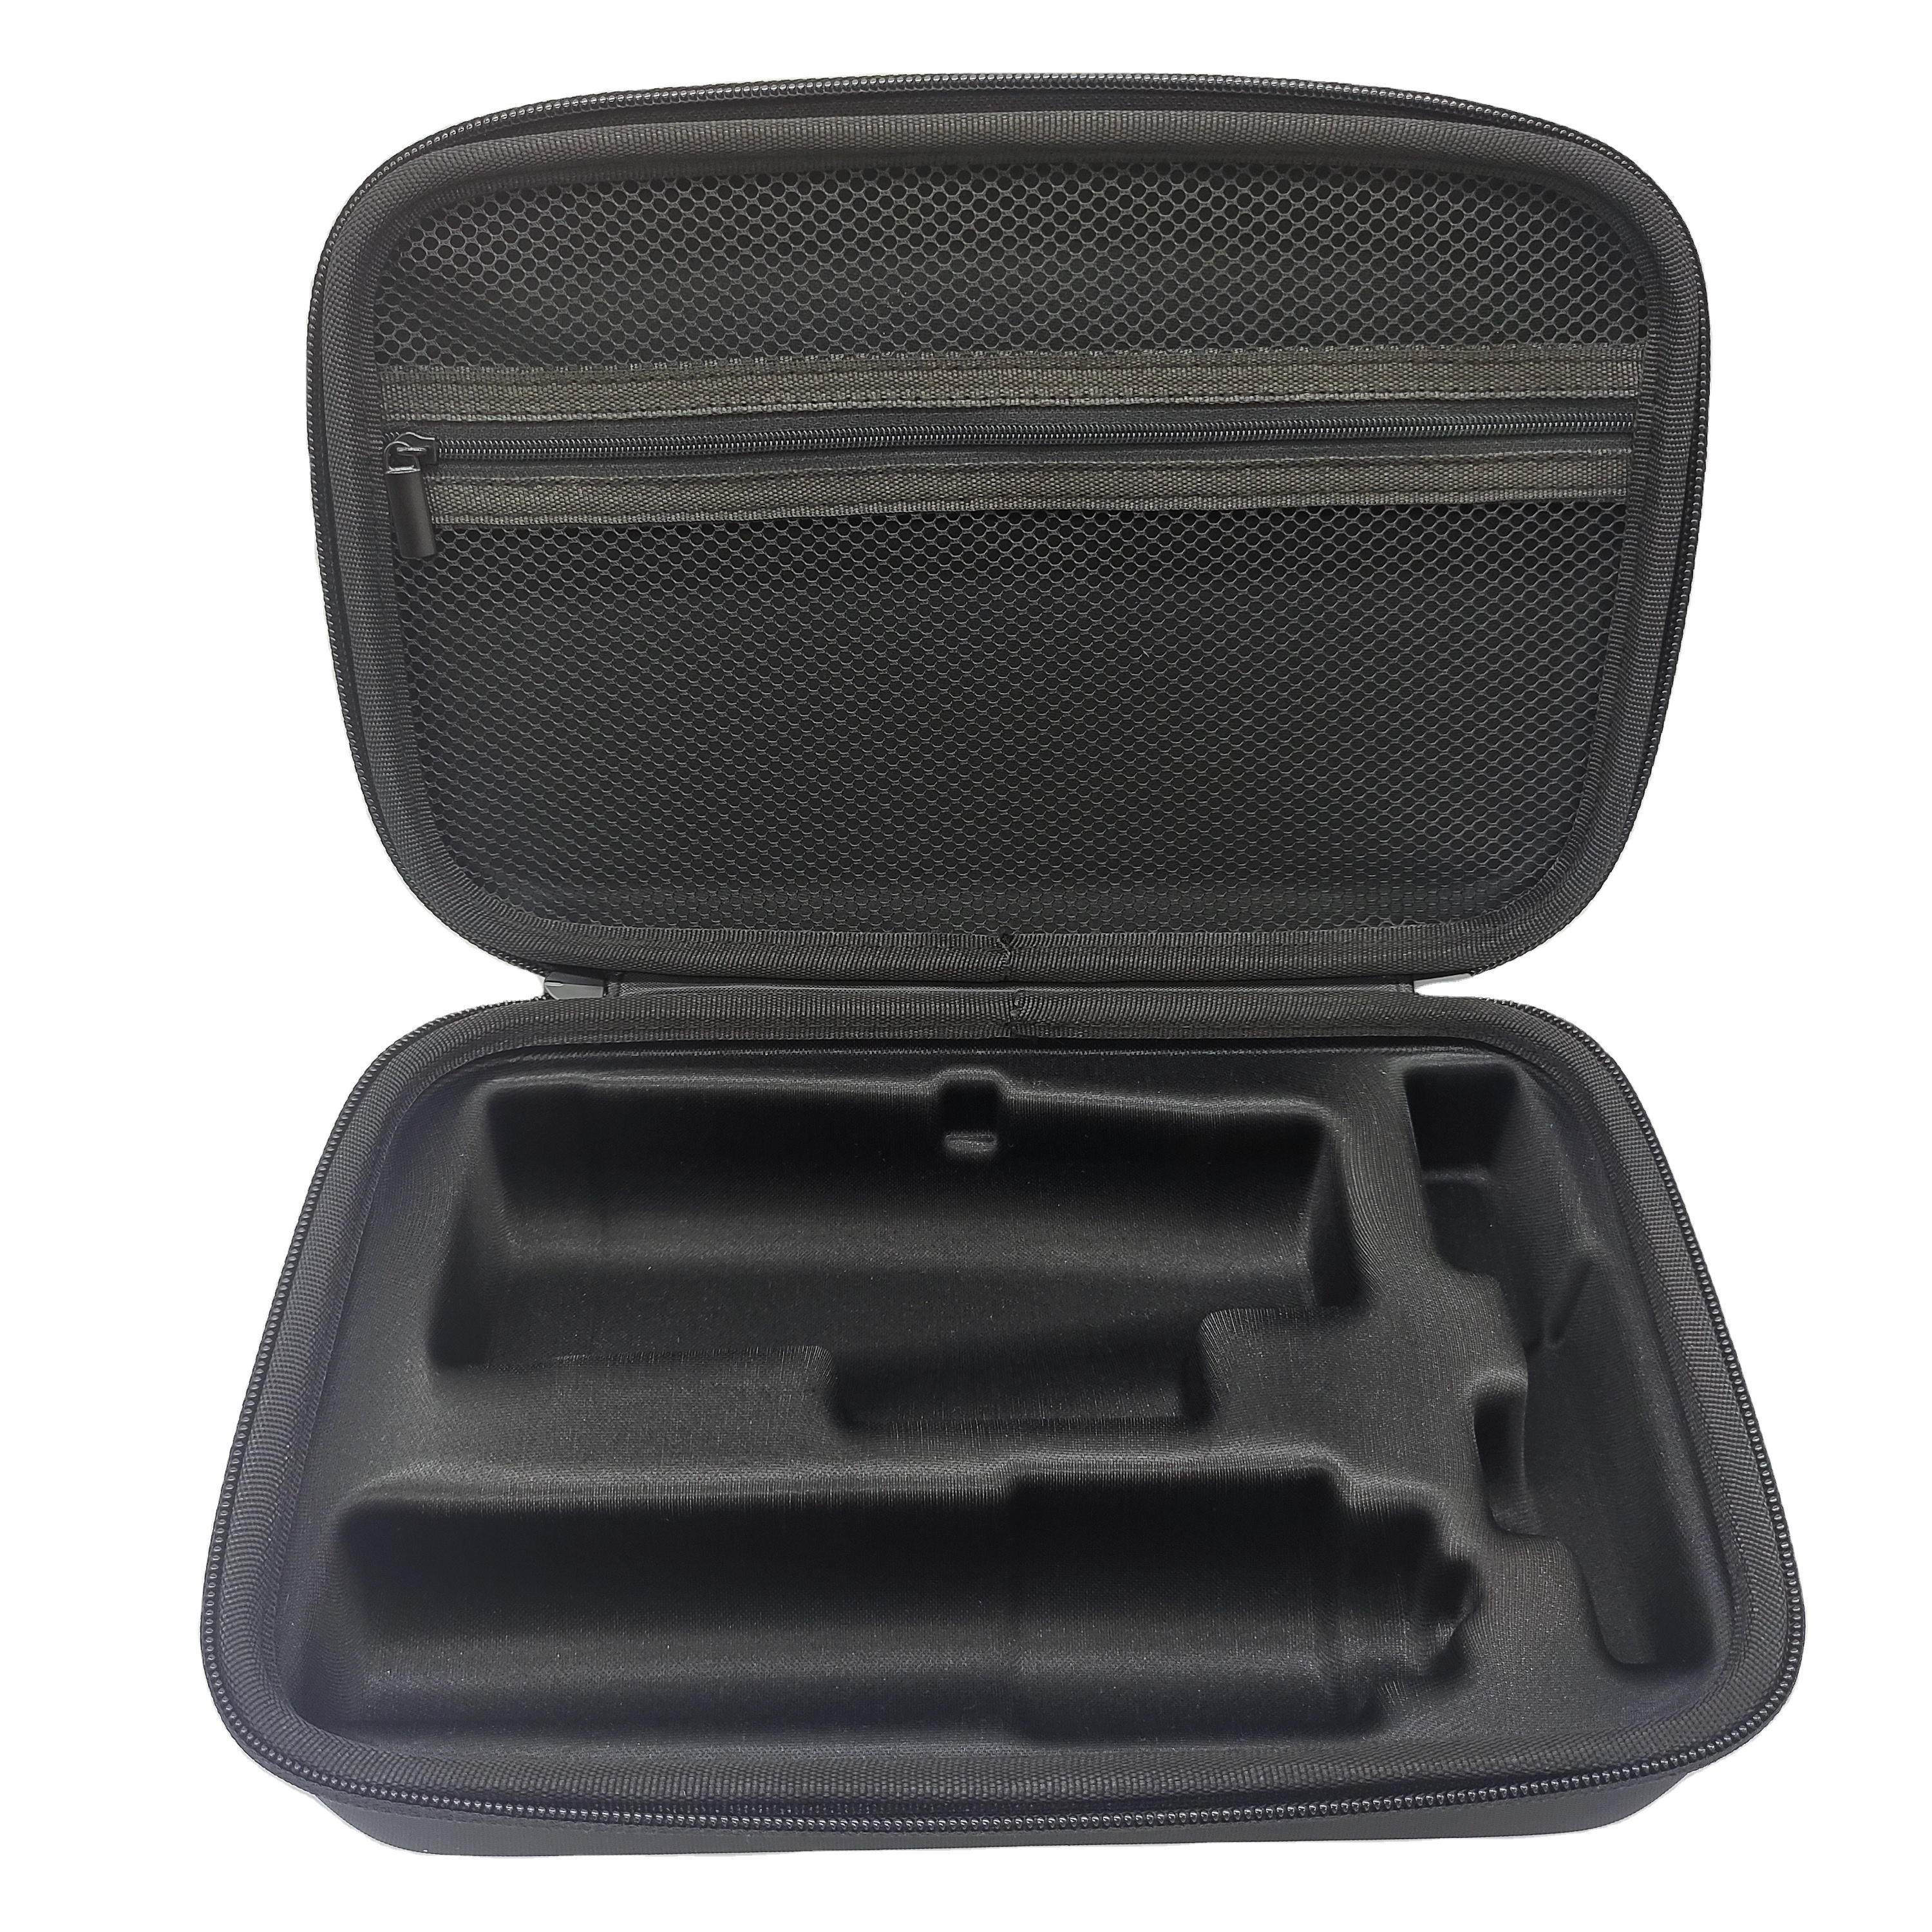 EVA hard carrying case for monocular telescope Hard Monocular Telescope Storage Box Holder telescope Carrying Case